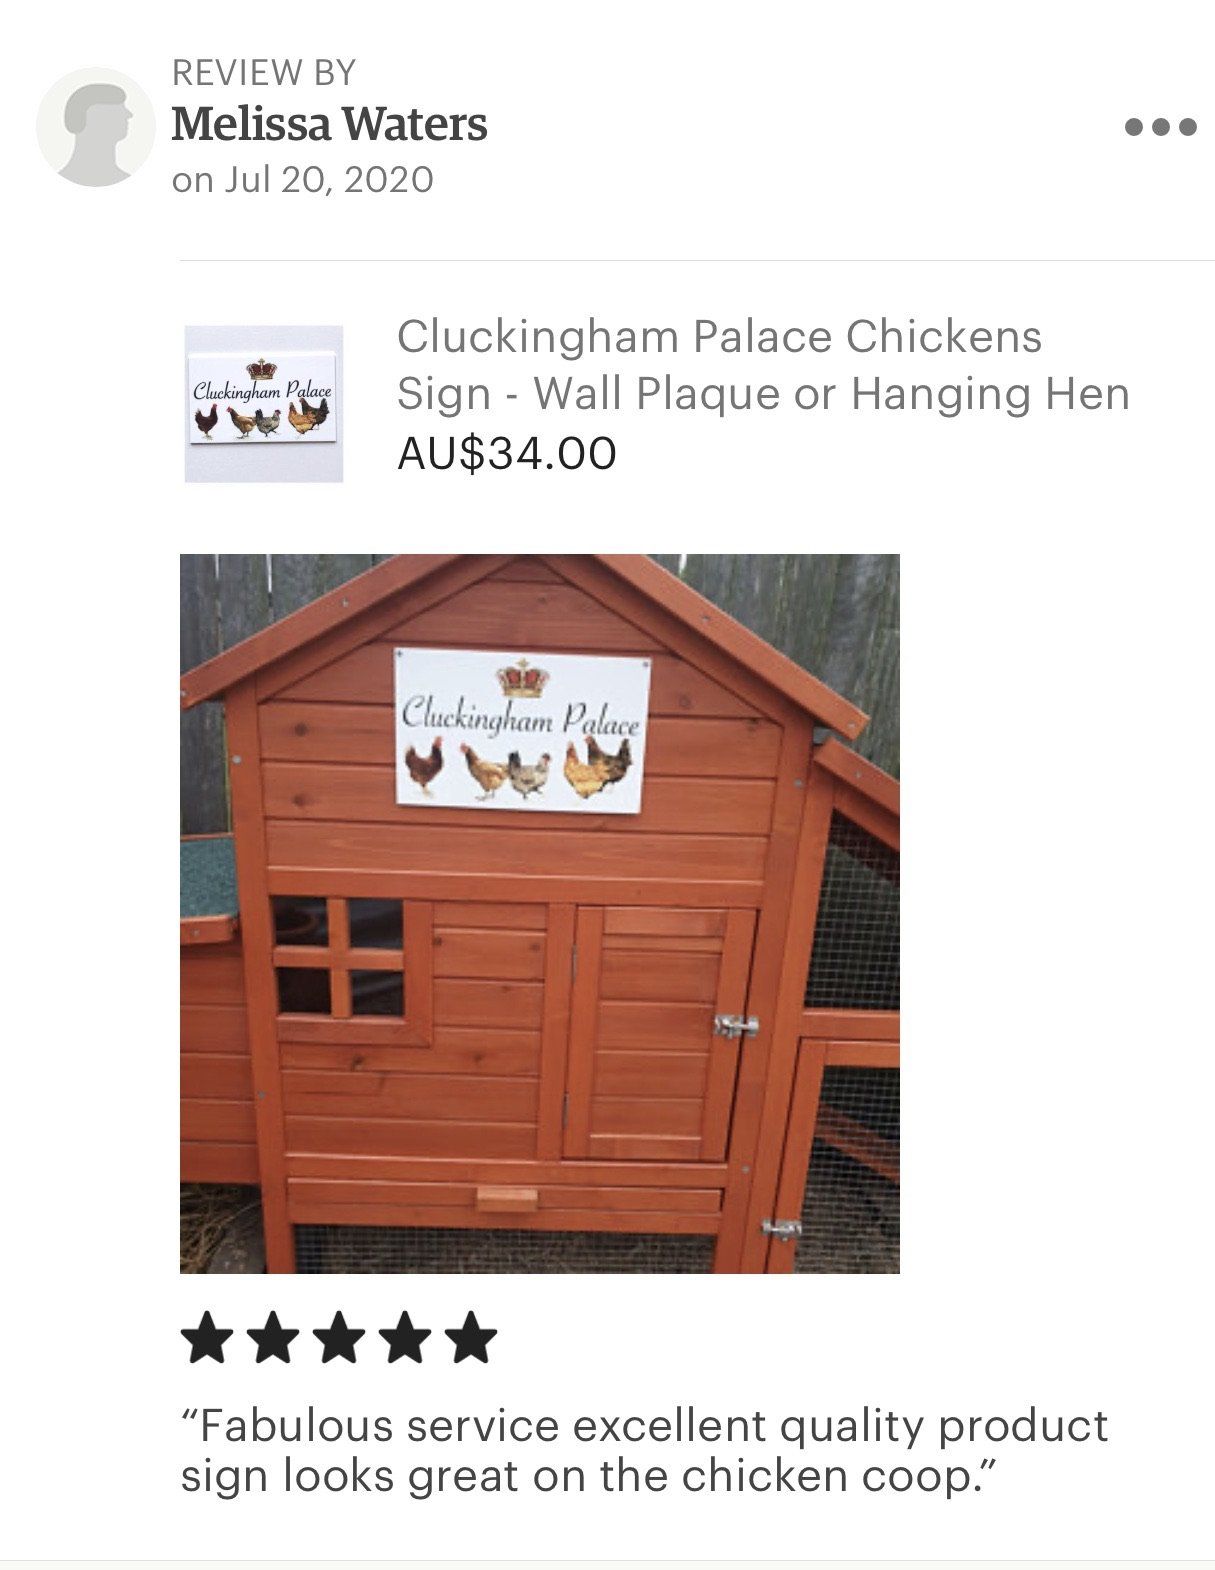 Cluckingham Palace Chicken Coop Sign